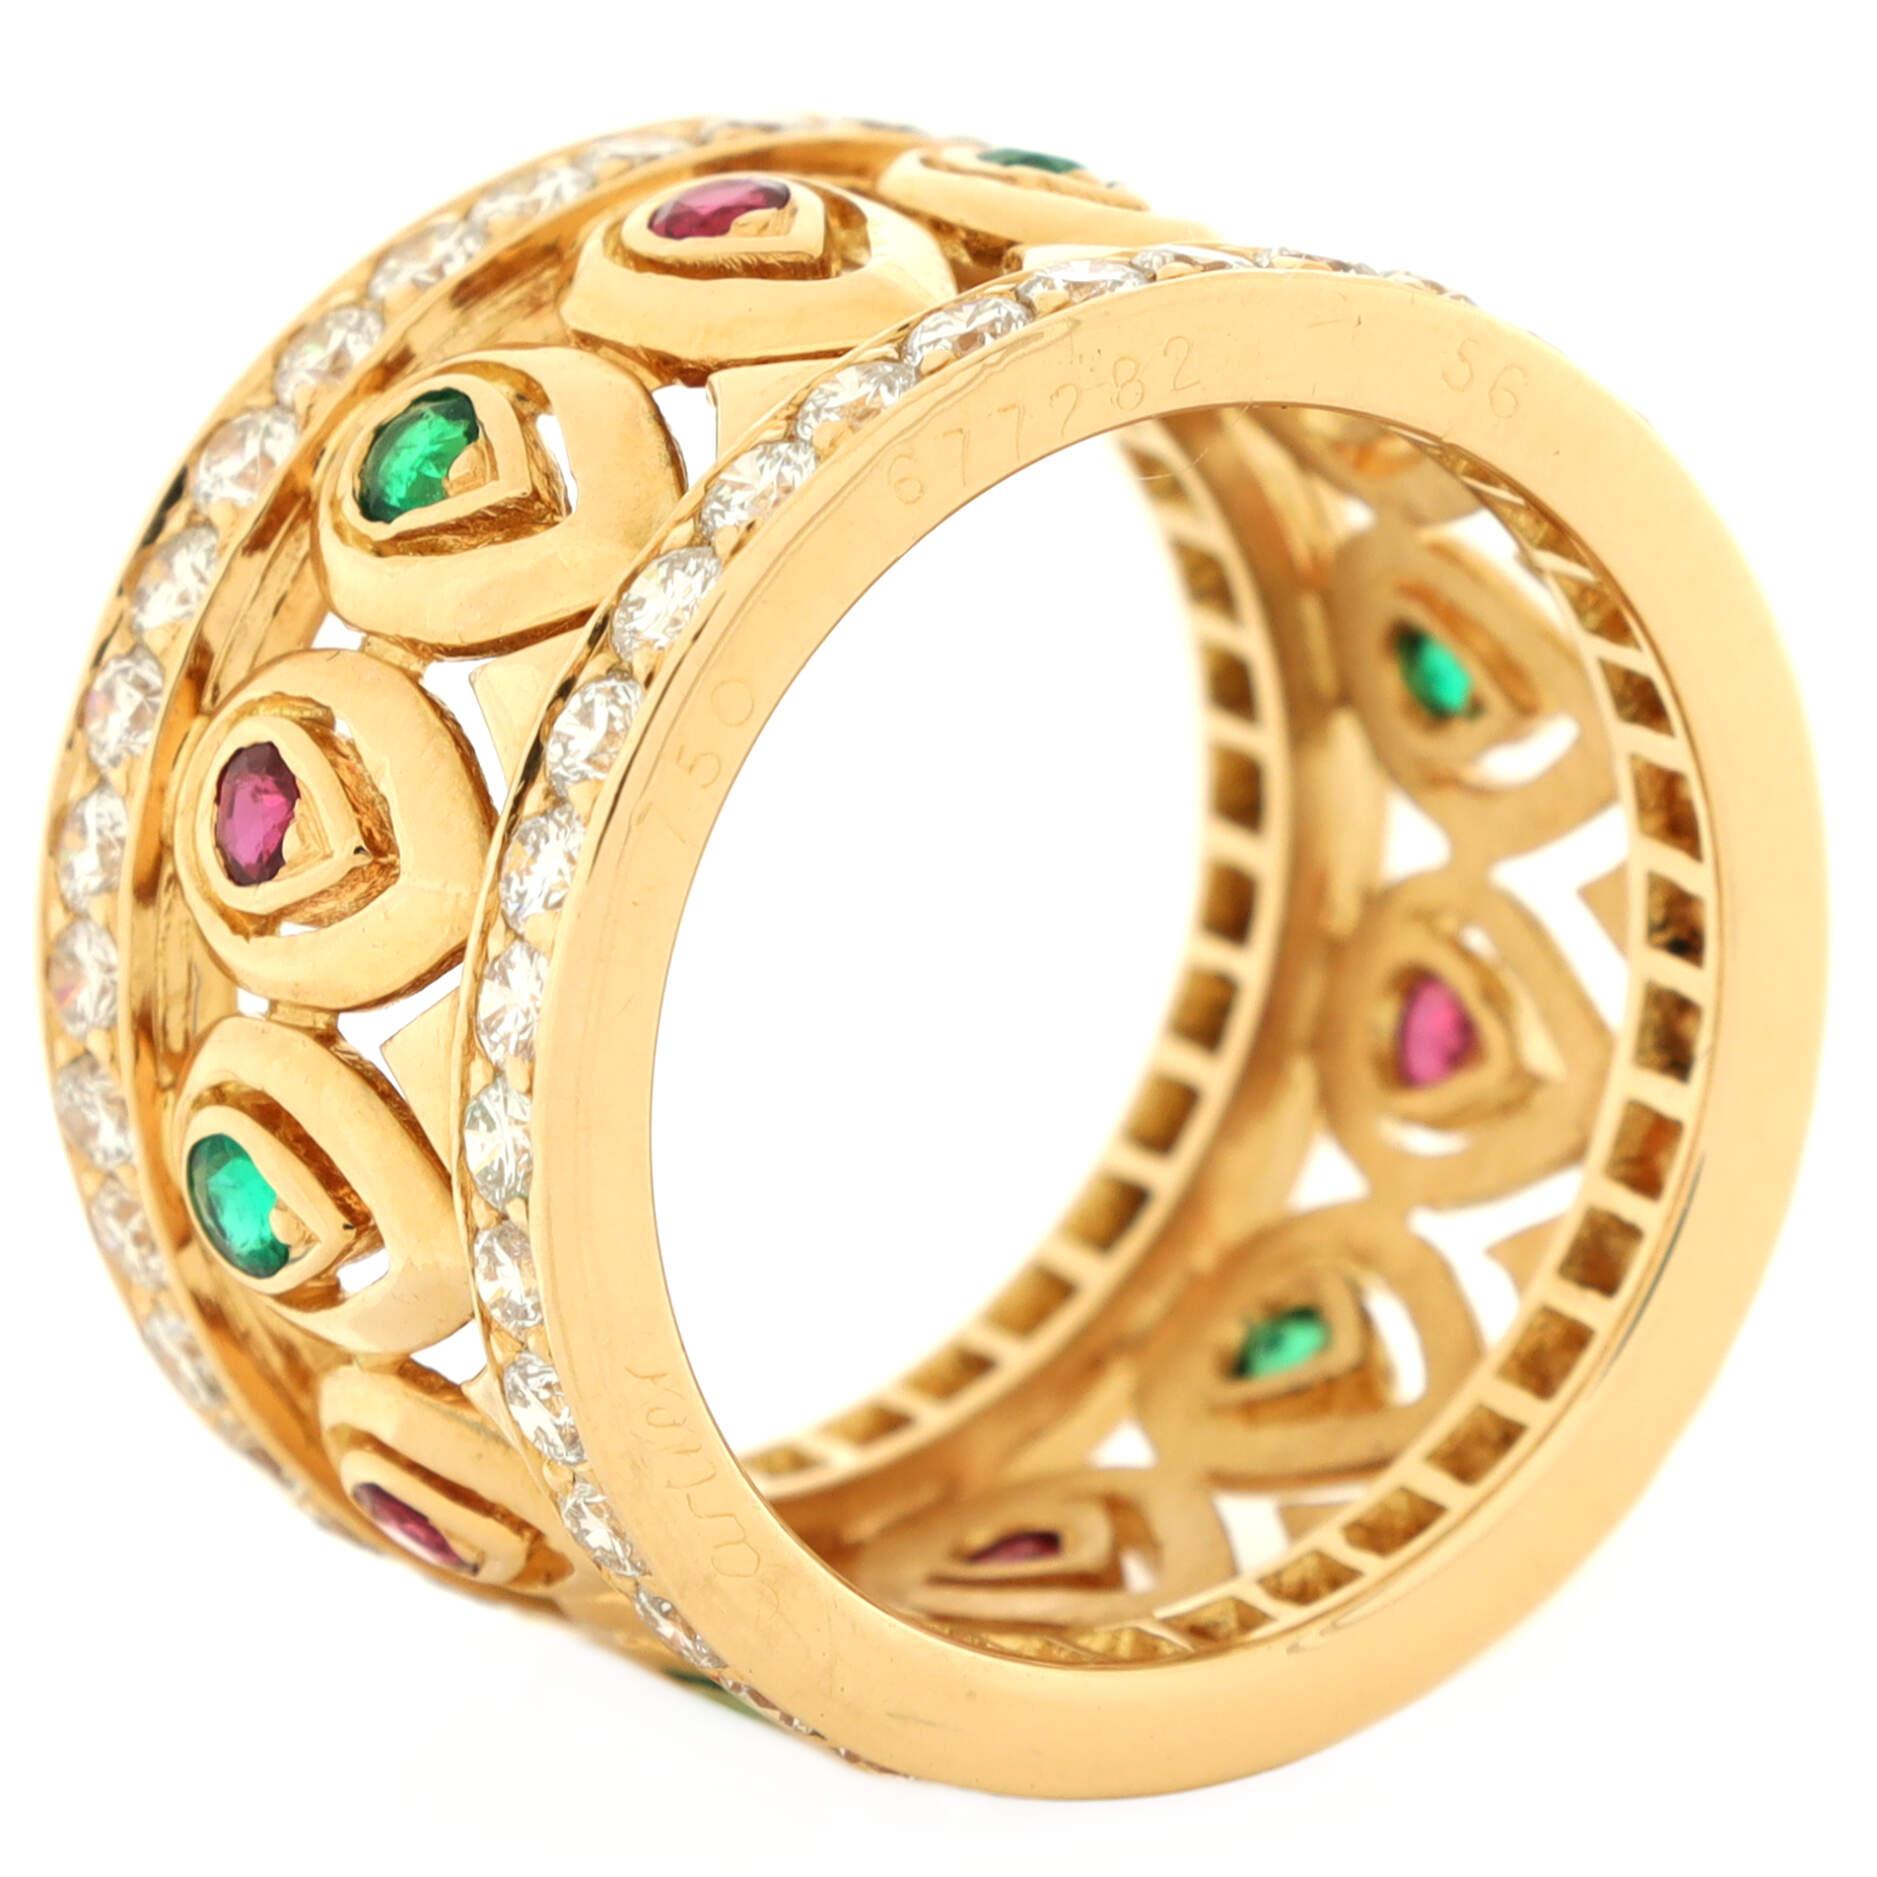 Women's or Men's Cartier Tanjore Band Ring 18K Yellow Gold with Rubies, Emeralds and Pave  For Sale